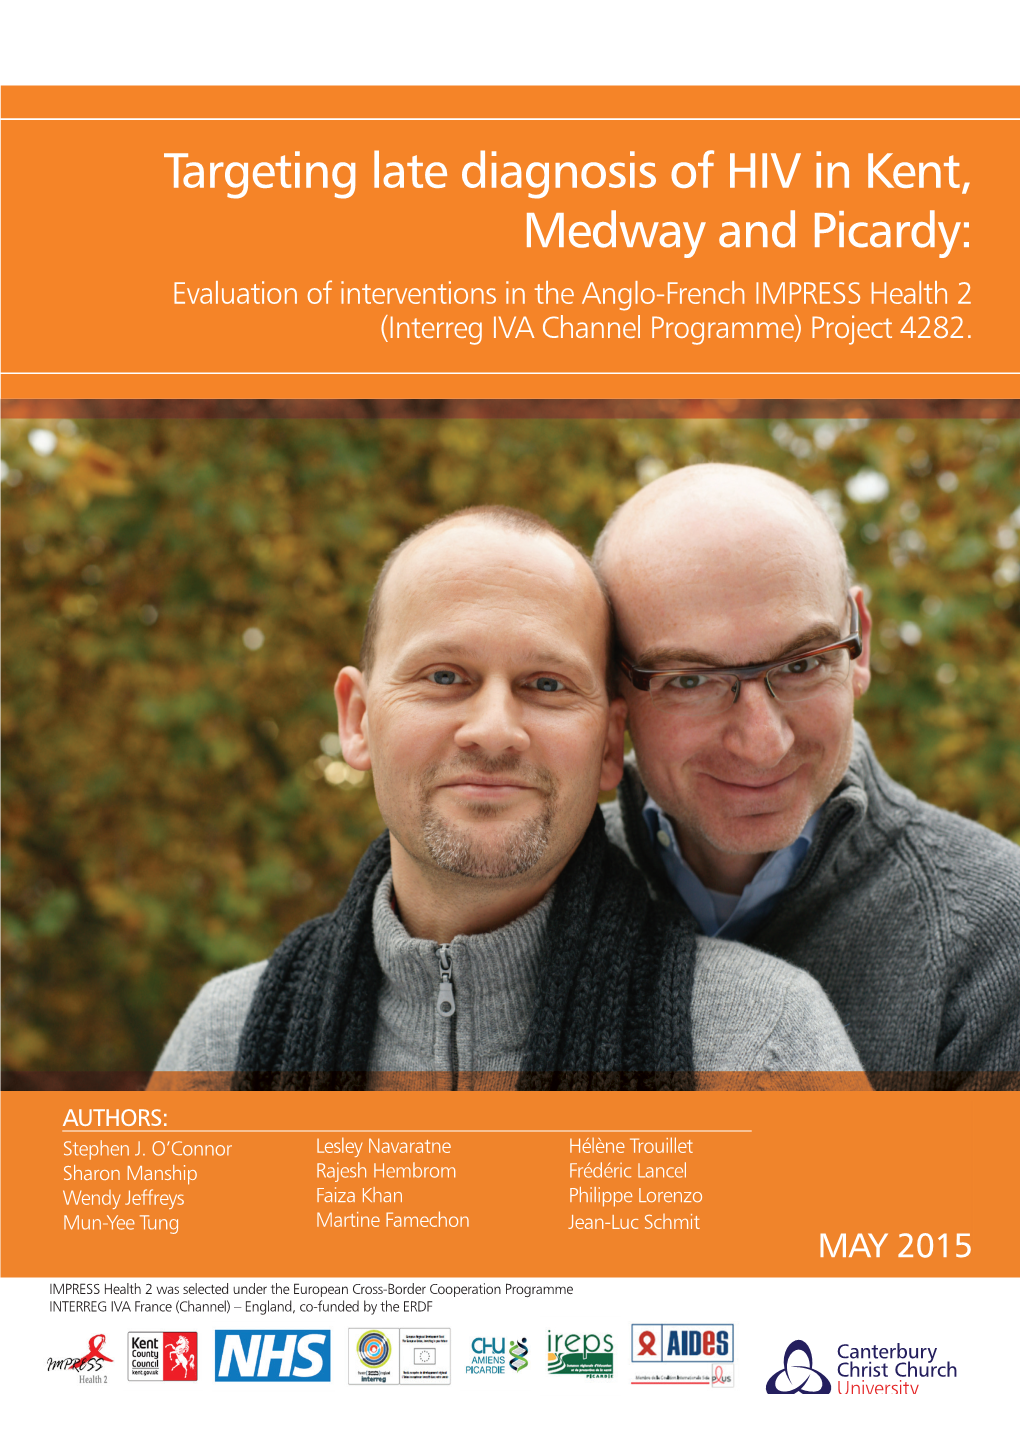 Targeting Late Diagnosis of HIV in Kent, Medway and Picardy